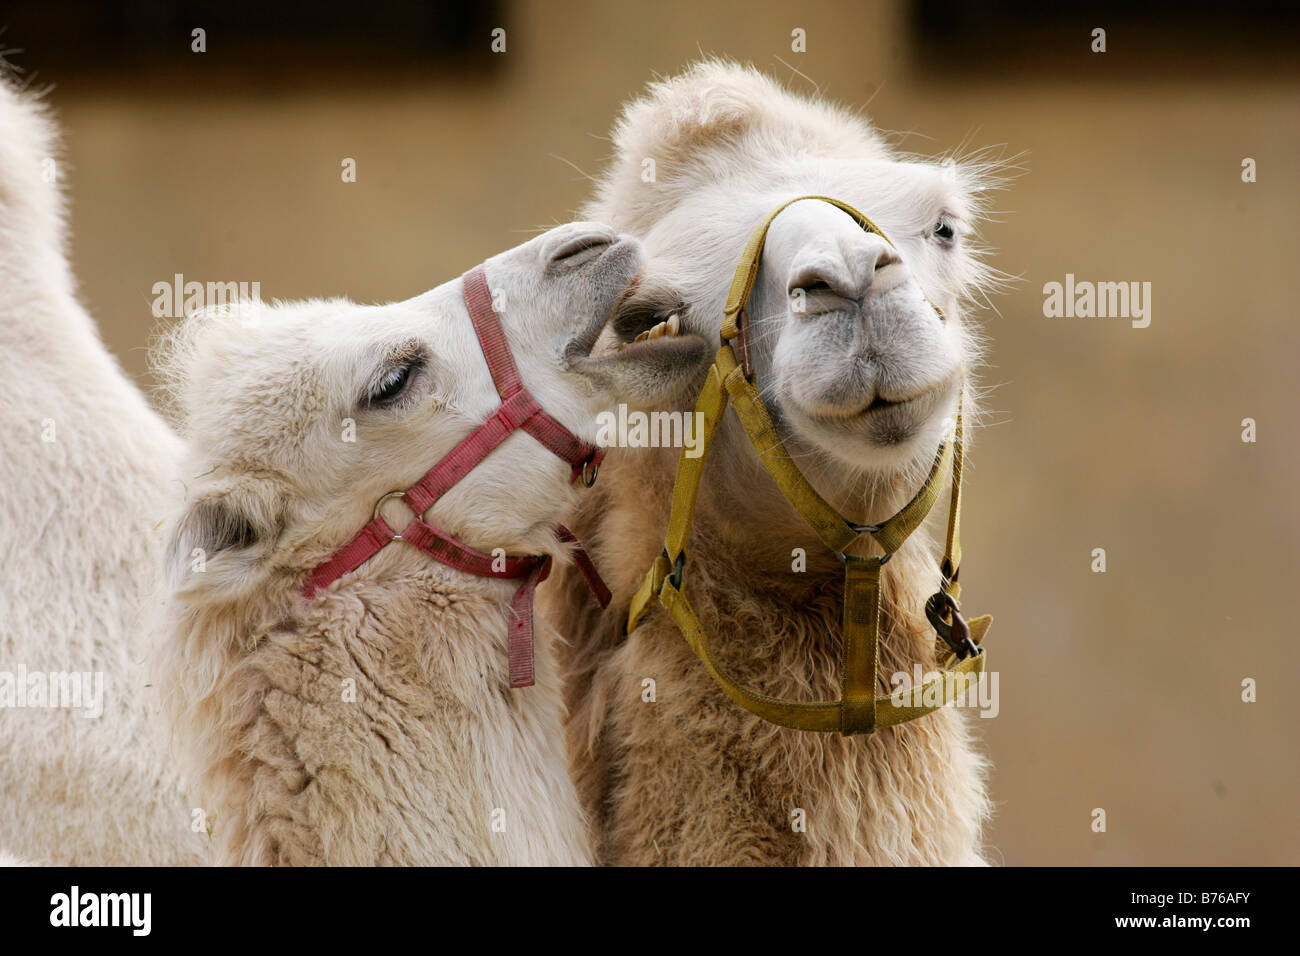 bactrian camel camelus ferus bactrianus large even toed ungulate couple potrait sweet family ties funny droll fun foal caressing Stock Photo